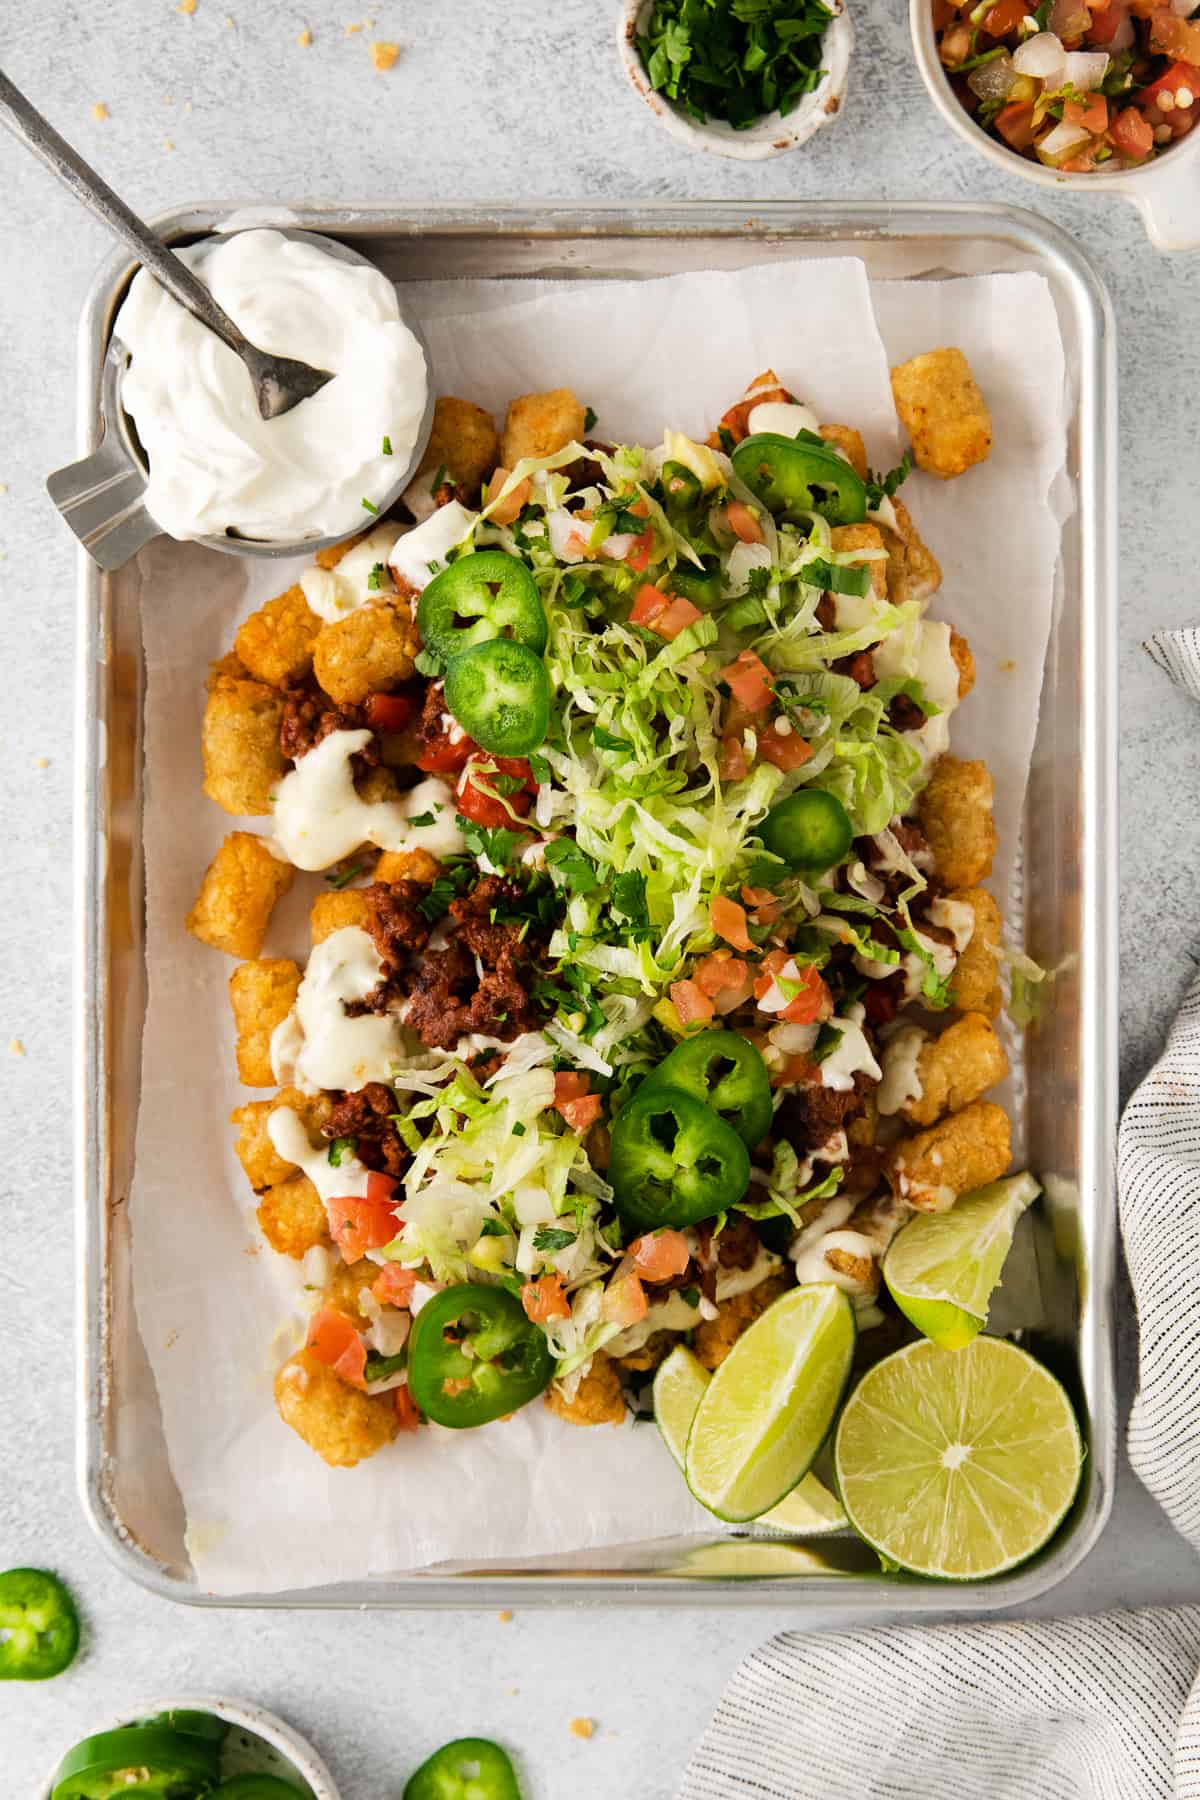 Totchos topped with nacho fixings.